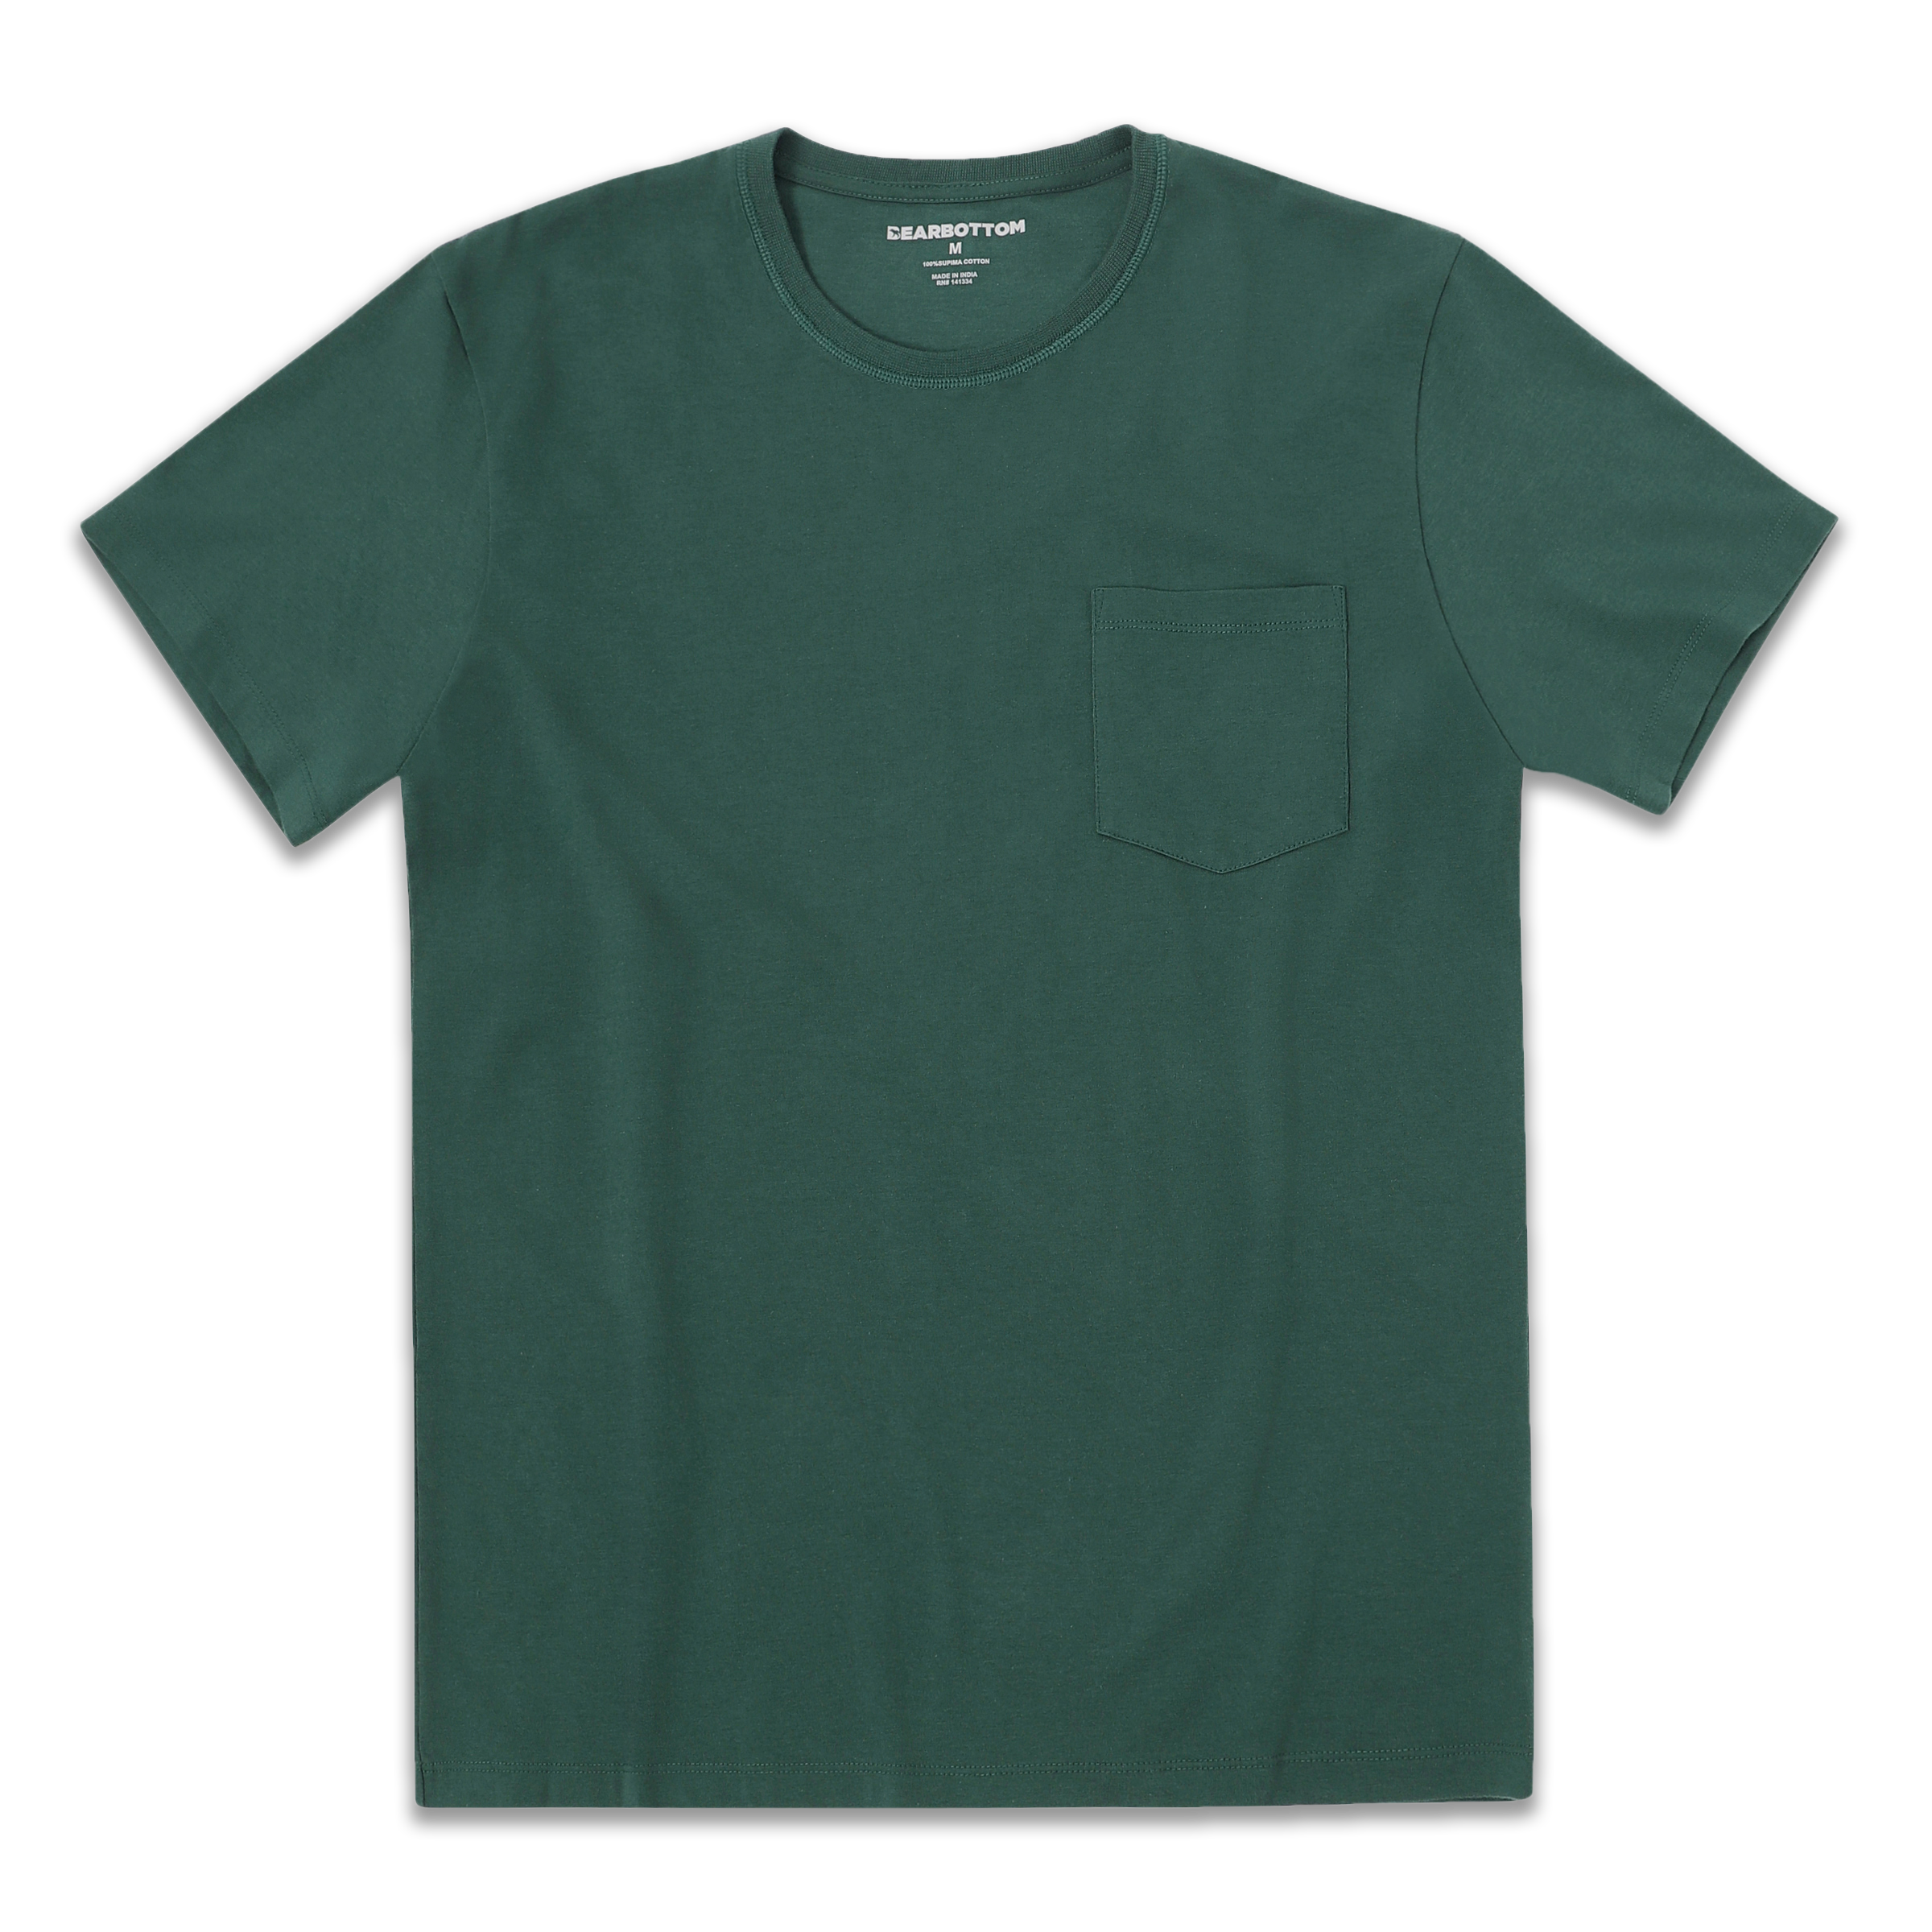 Supima Heavyweight Tee Field Green front with crewneck, short sleeves, and pocket on left chest